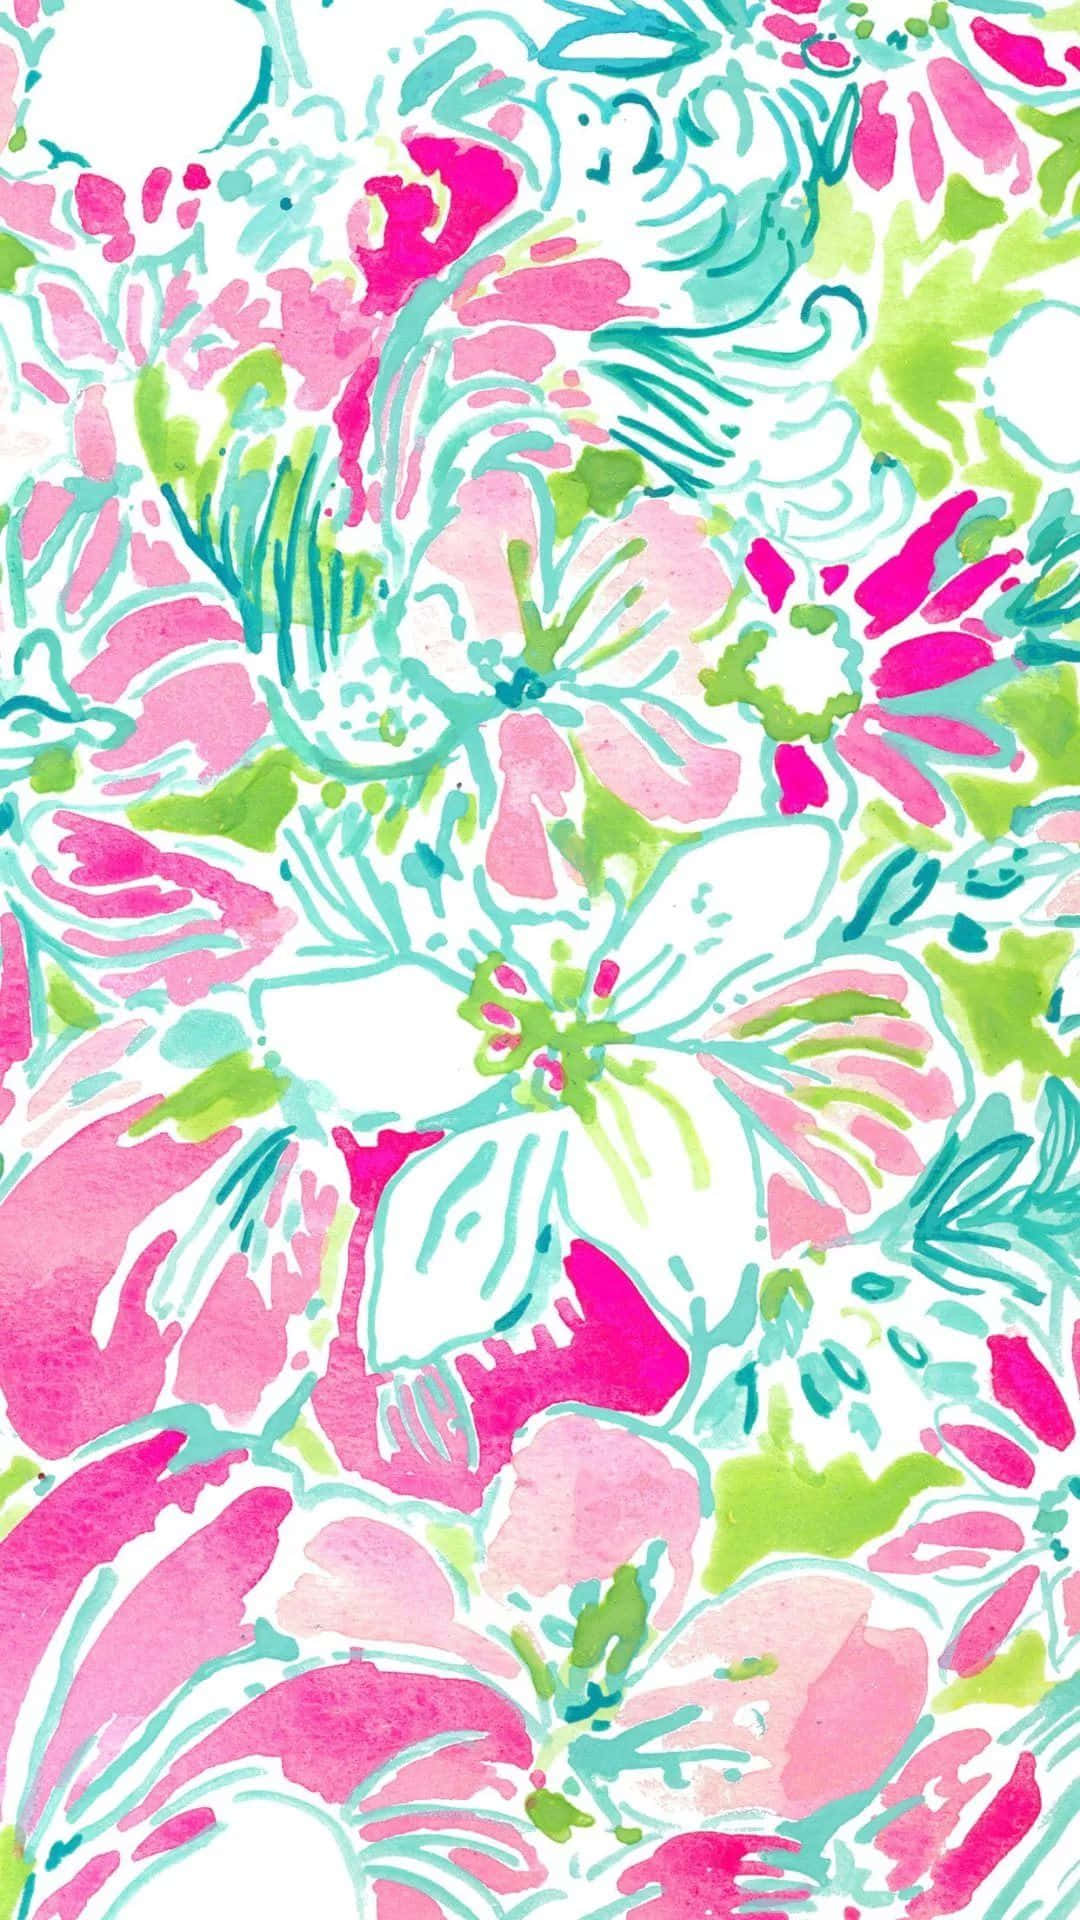 I Whale You  Lilly pulitzer iphone wallpaper Lily pulitzer wallpaper  Wallpaper iphone love